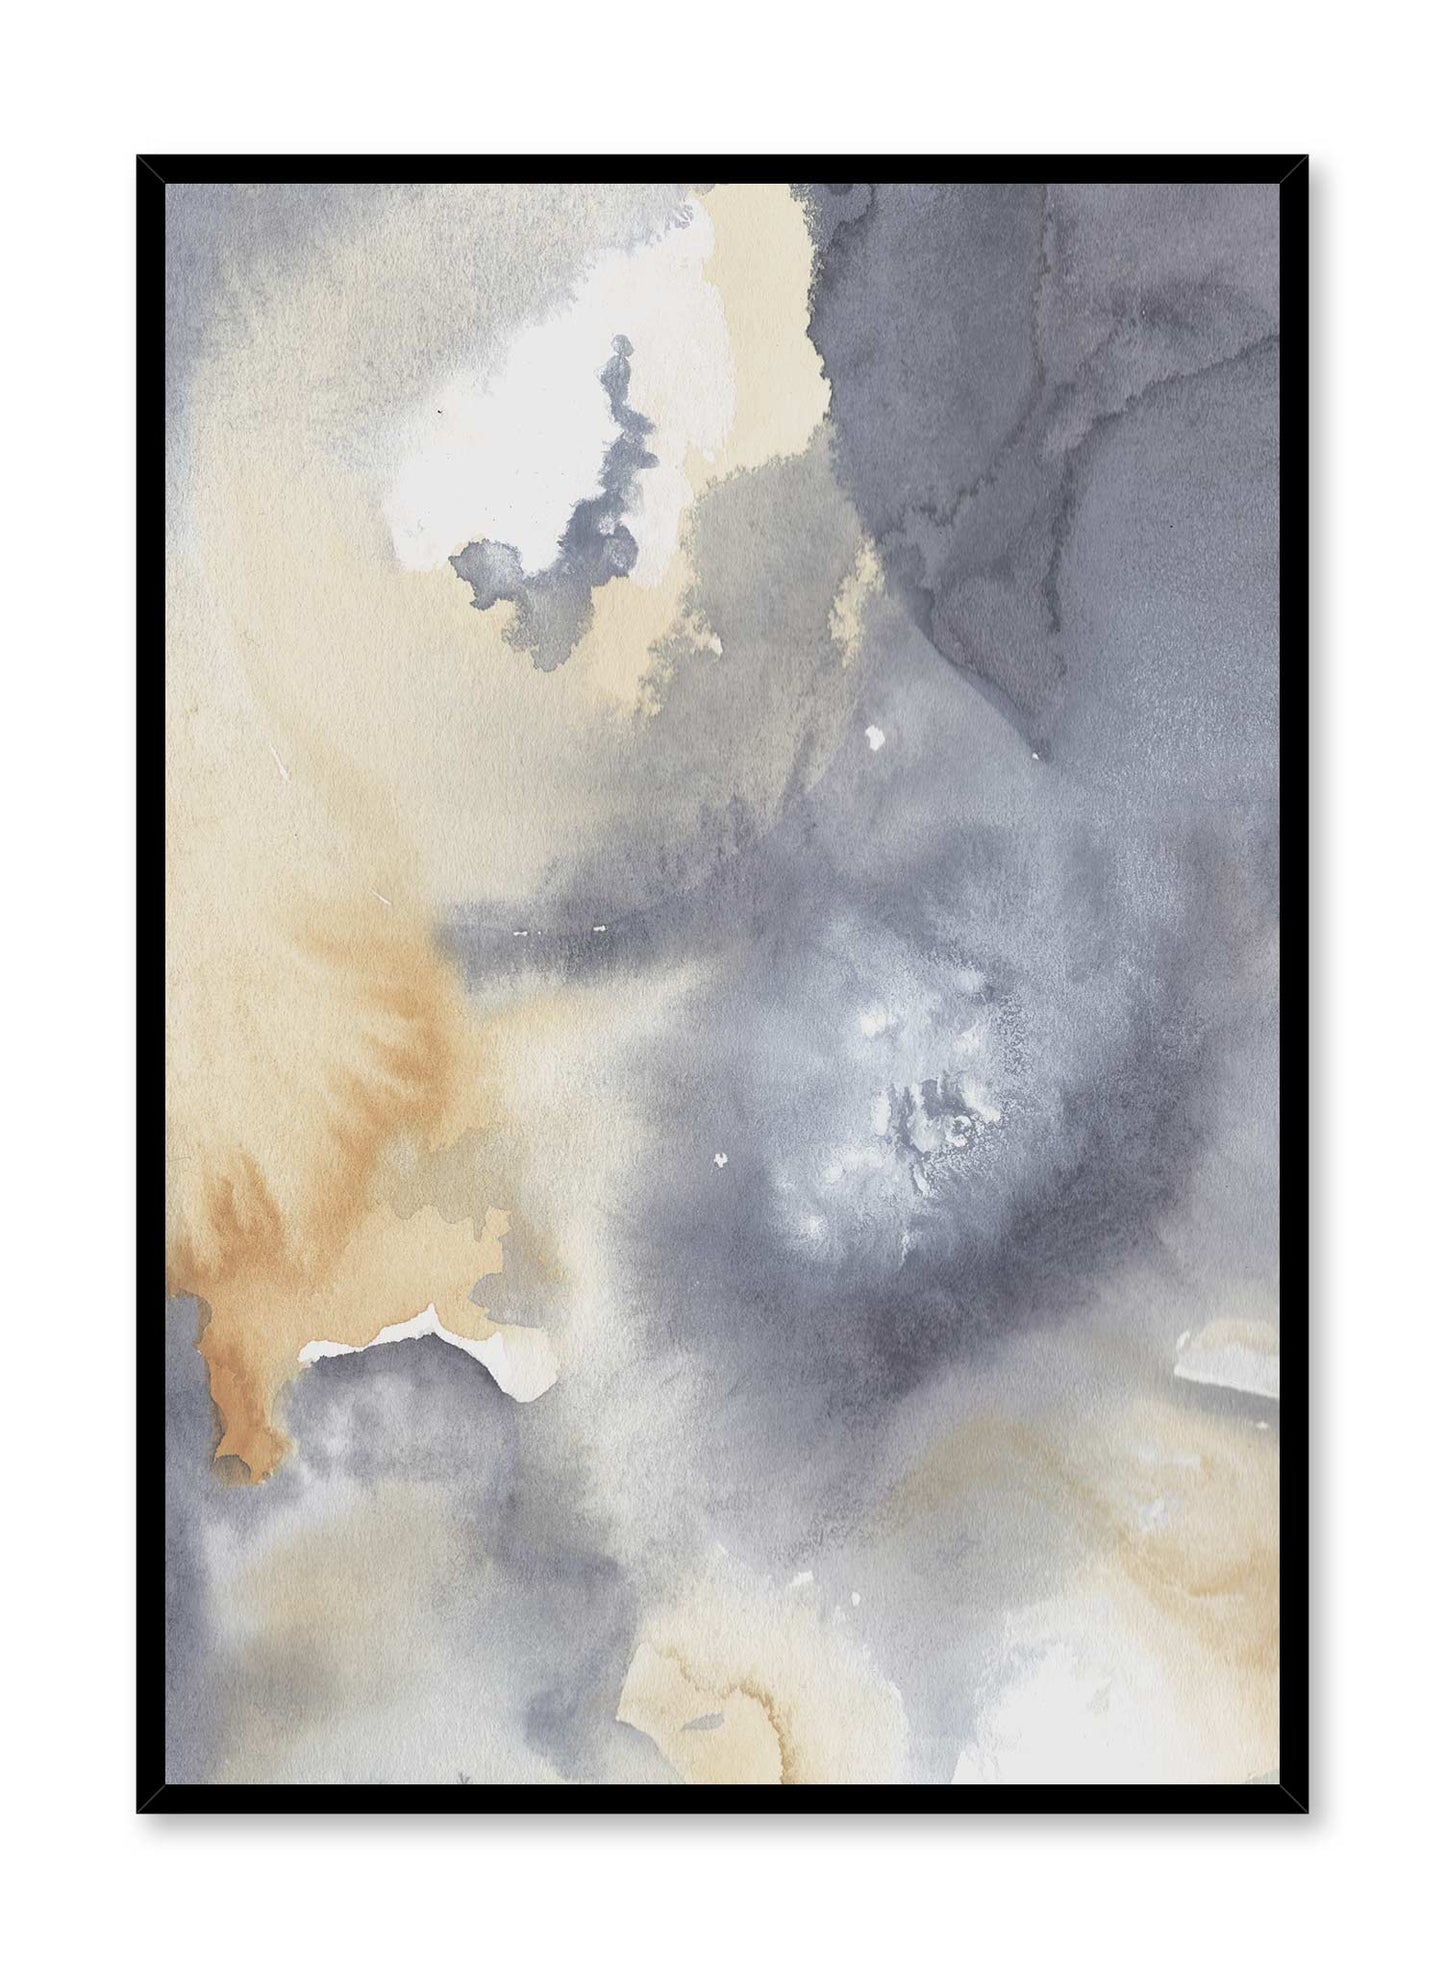 Seabed is a minimalist abstract illustration pof a superposition of yellow and gray watercolour blobs by Opposite Wall.